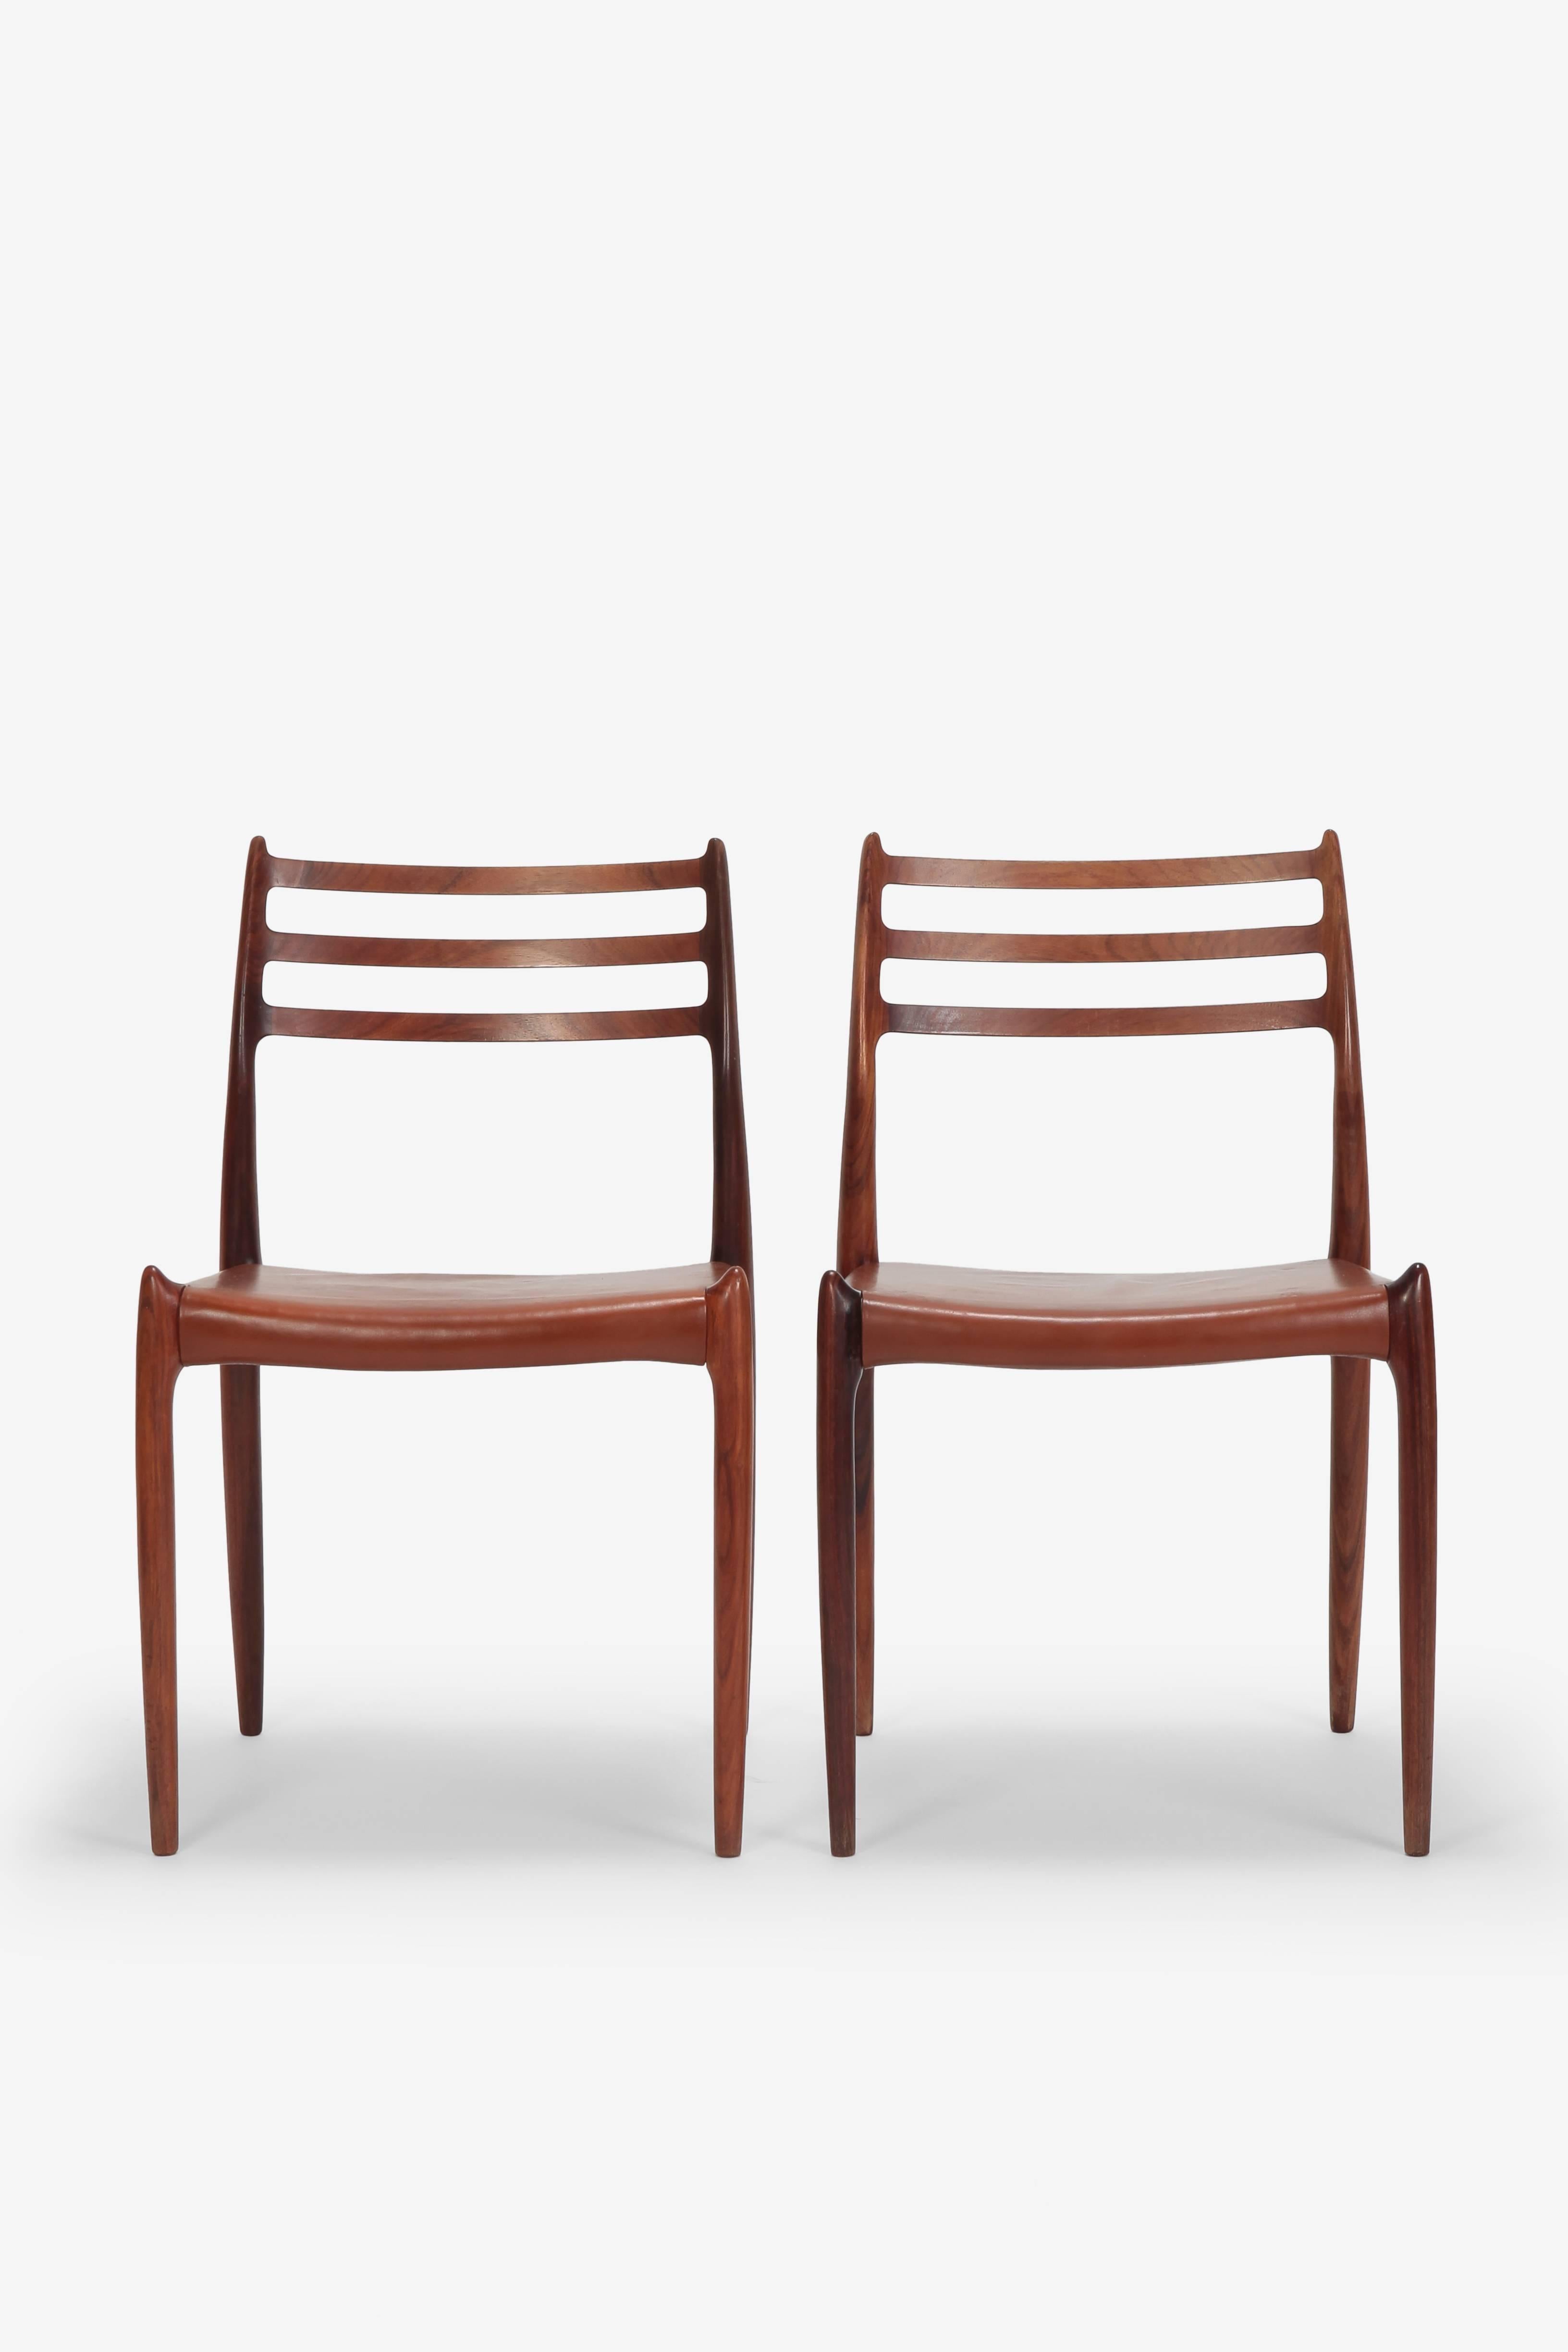 Pair of Niels Moller chairs model 78 manufactured by J.L. Moller in the 1960s. Slightly organic design structure of solid rosewood, brown leather seat covers.